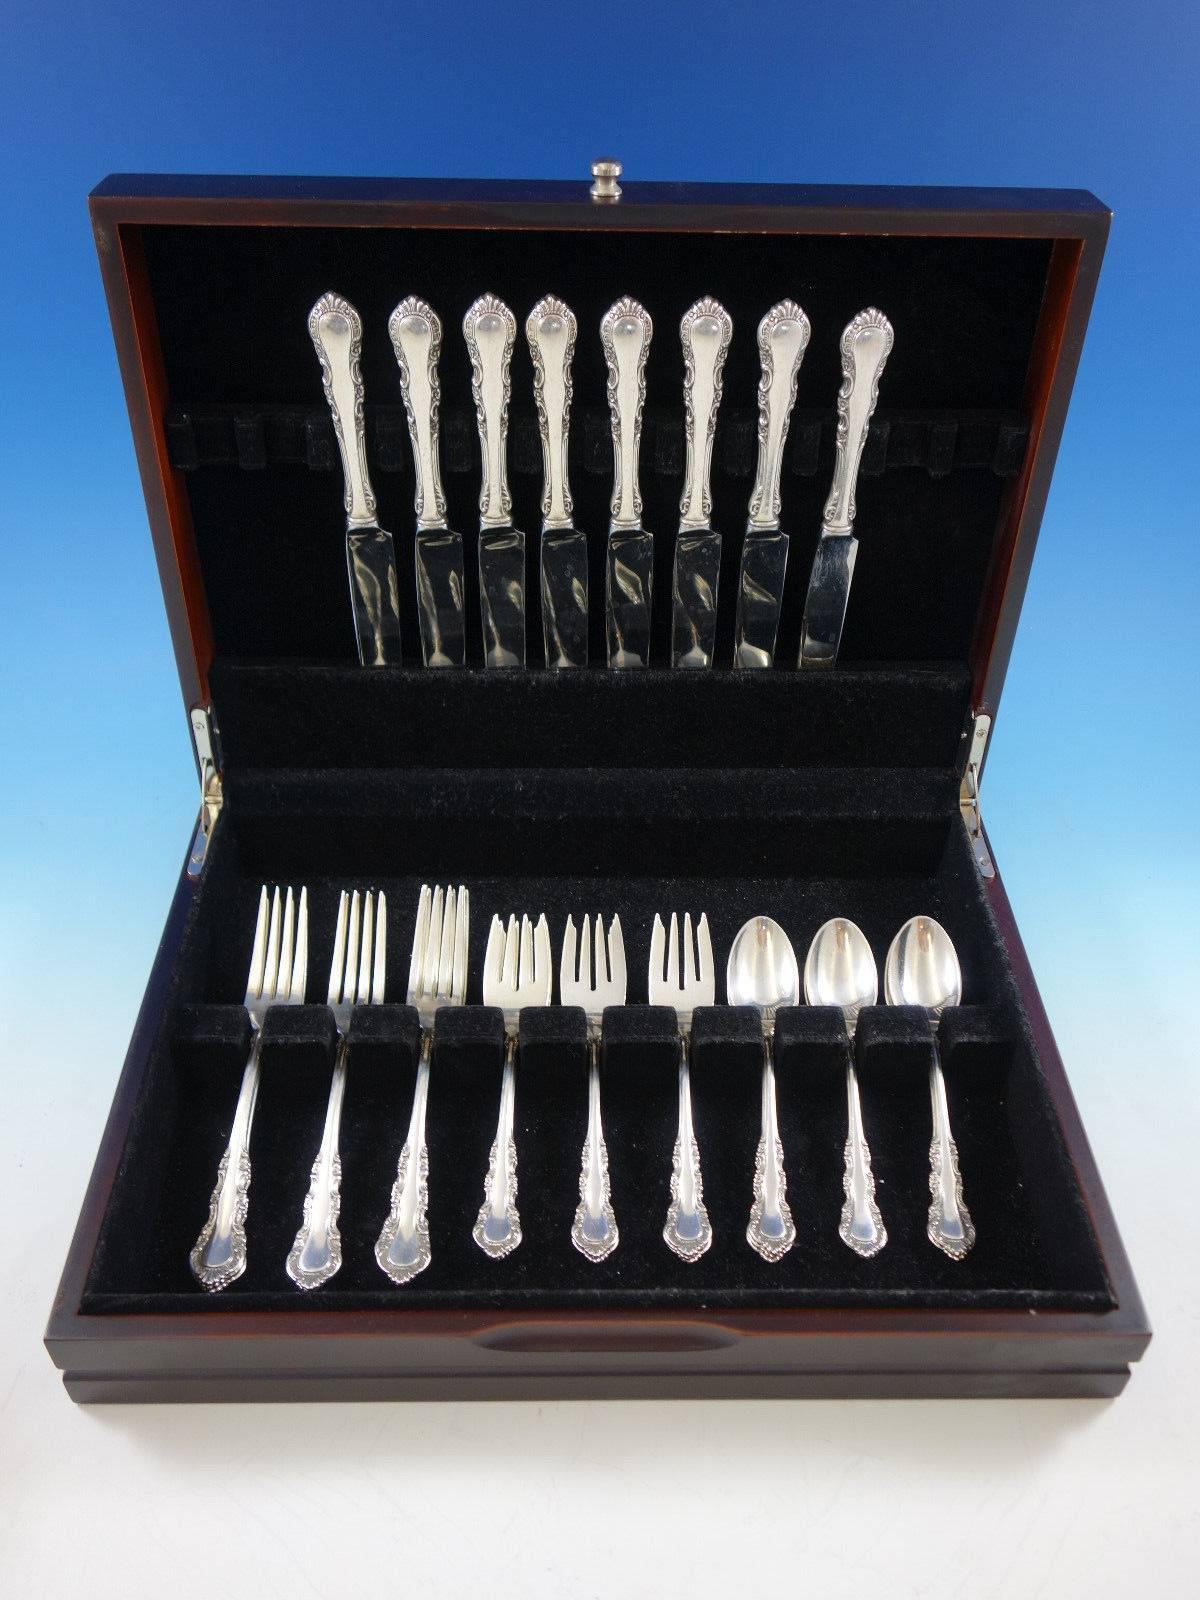 Georgian Rose by Reed & Barton sterling silver flatware set, 32 pieces. This set includes: 

Eight knives, 9